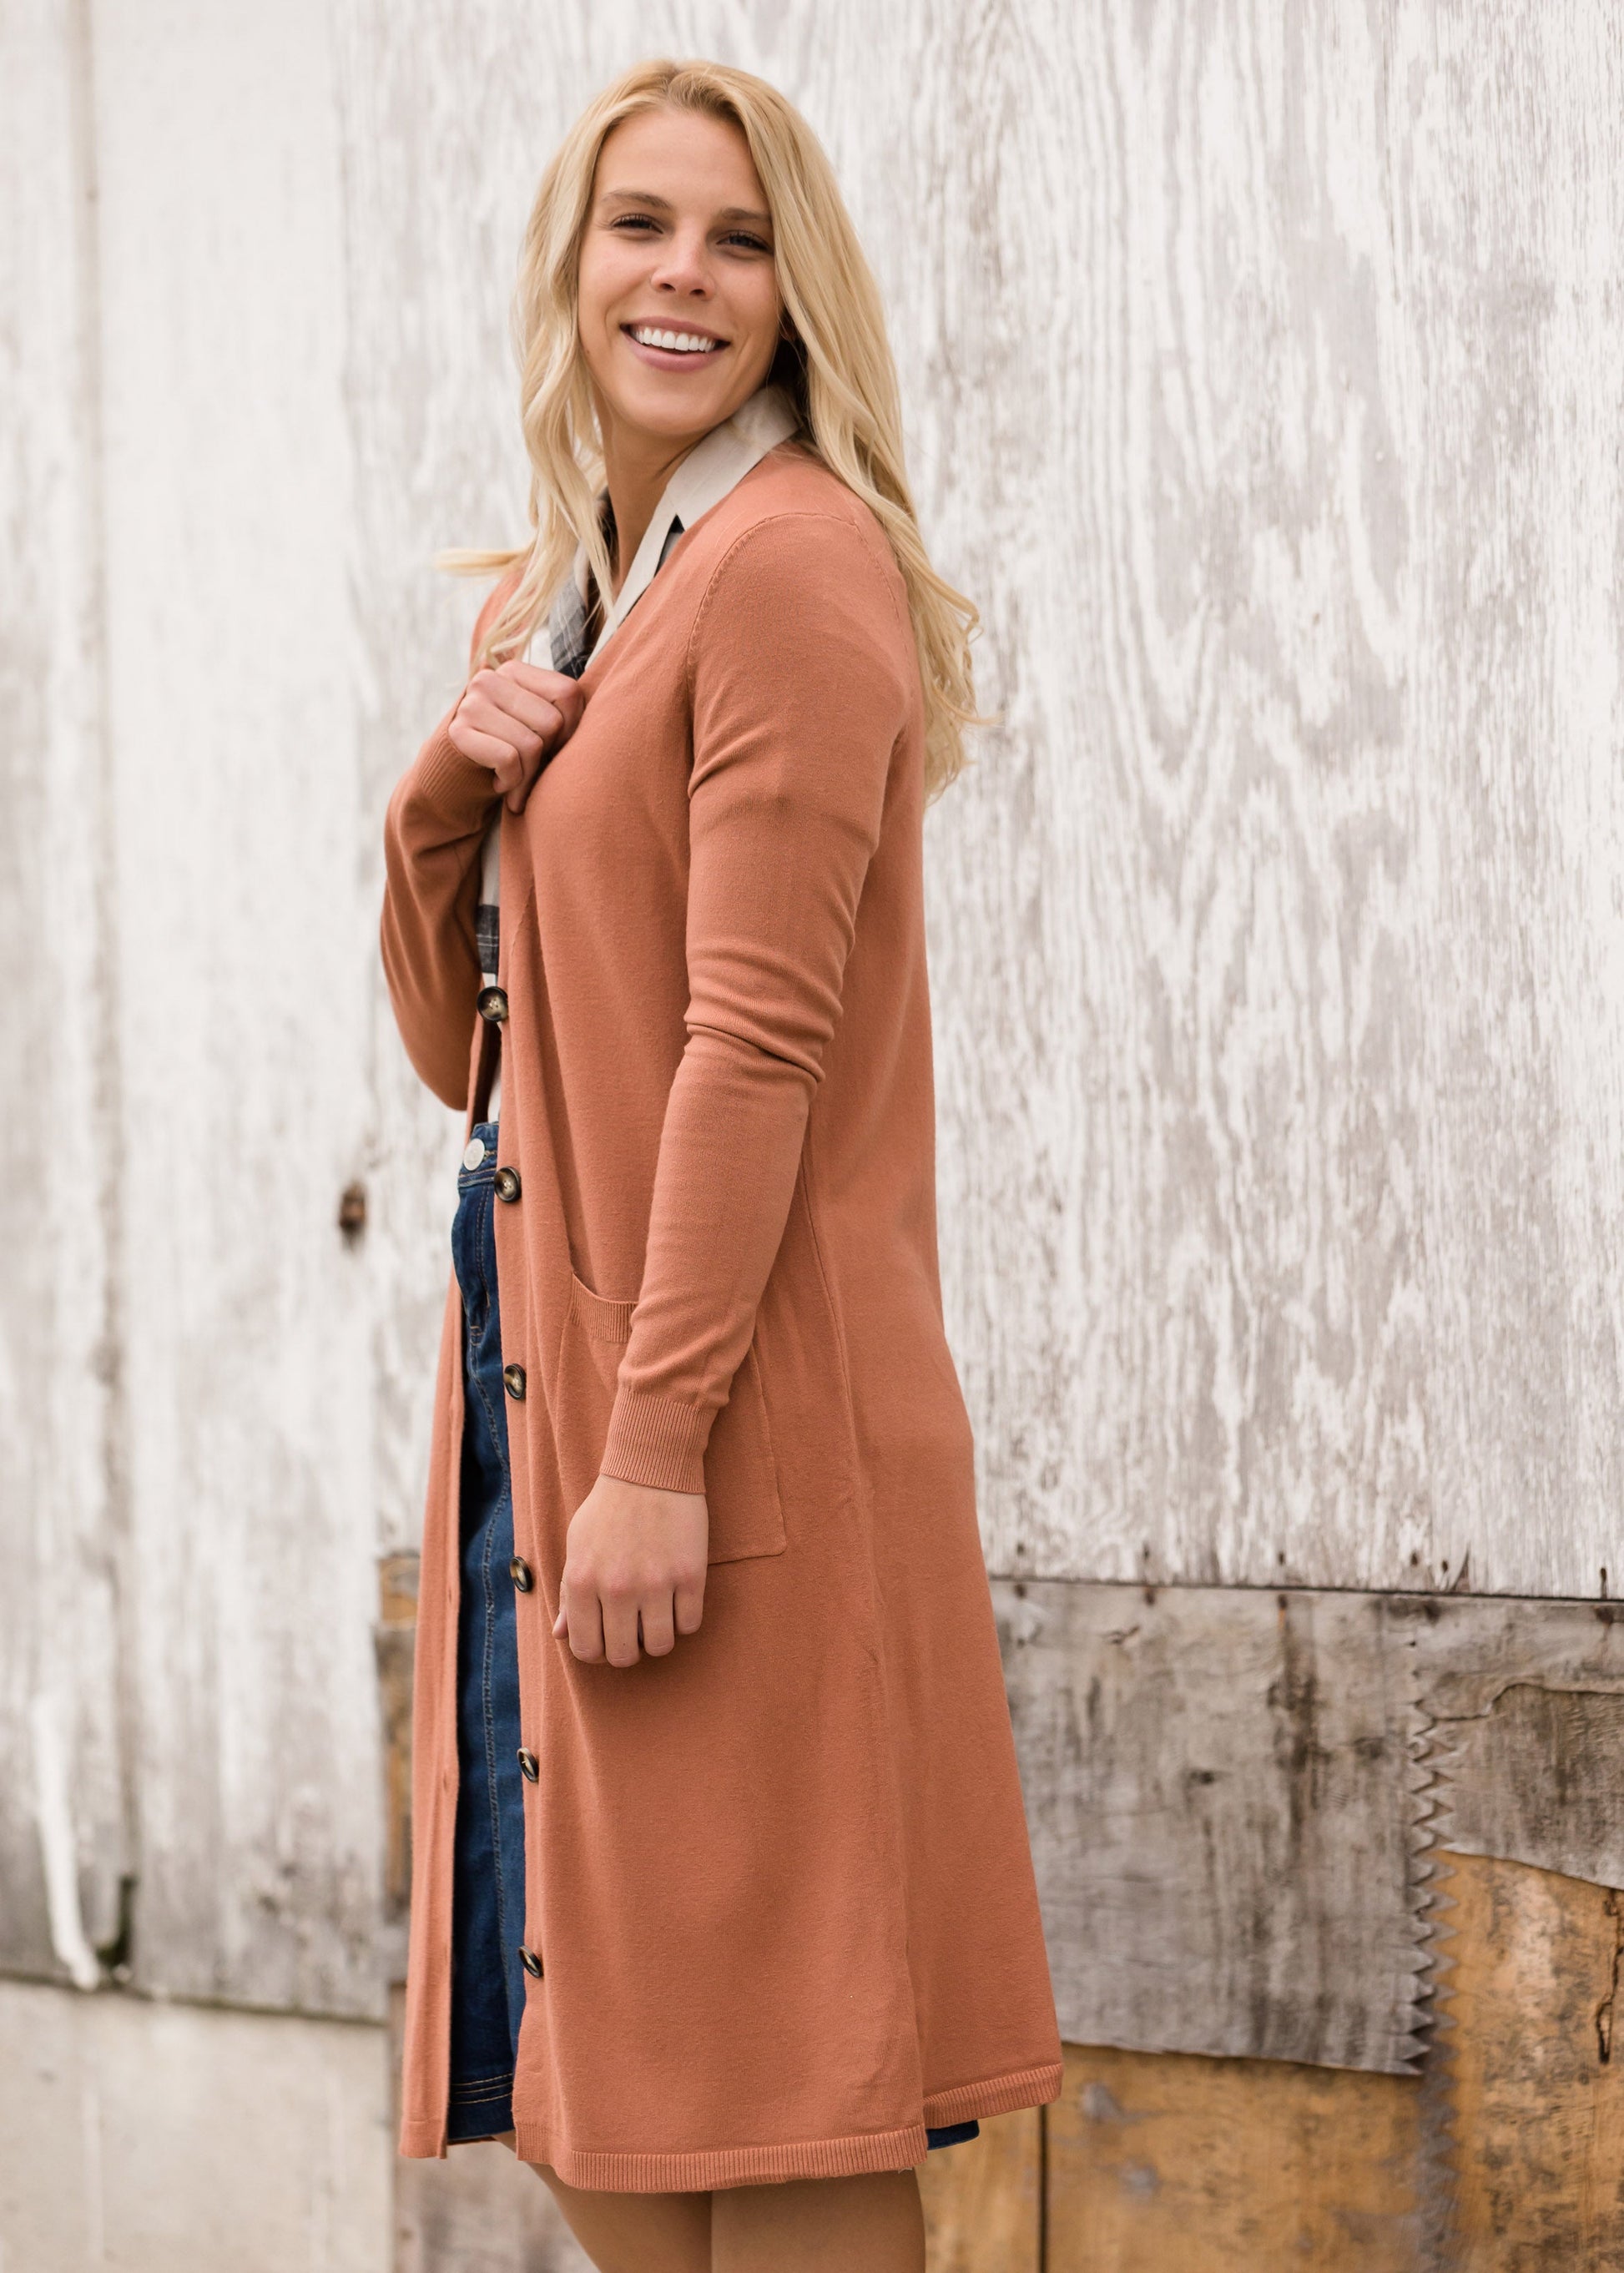 Double Pocket Open Front Cardigan - FINAL SALE Layering Essentials